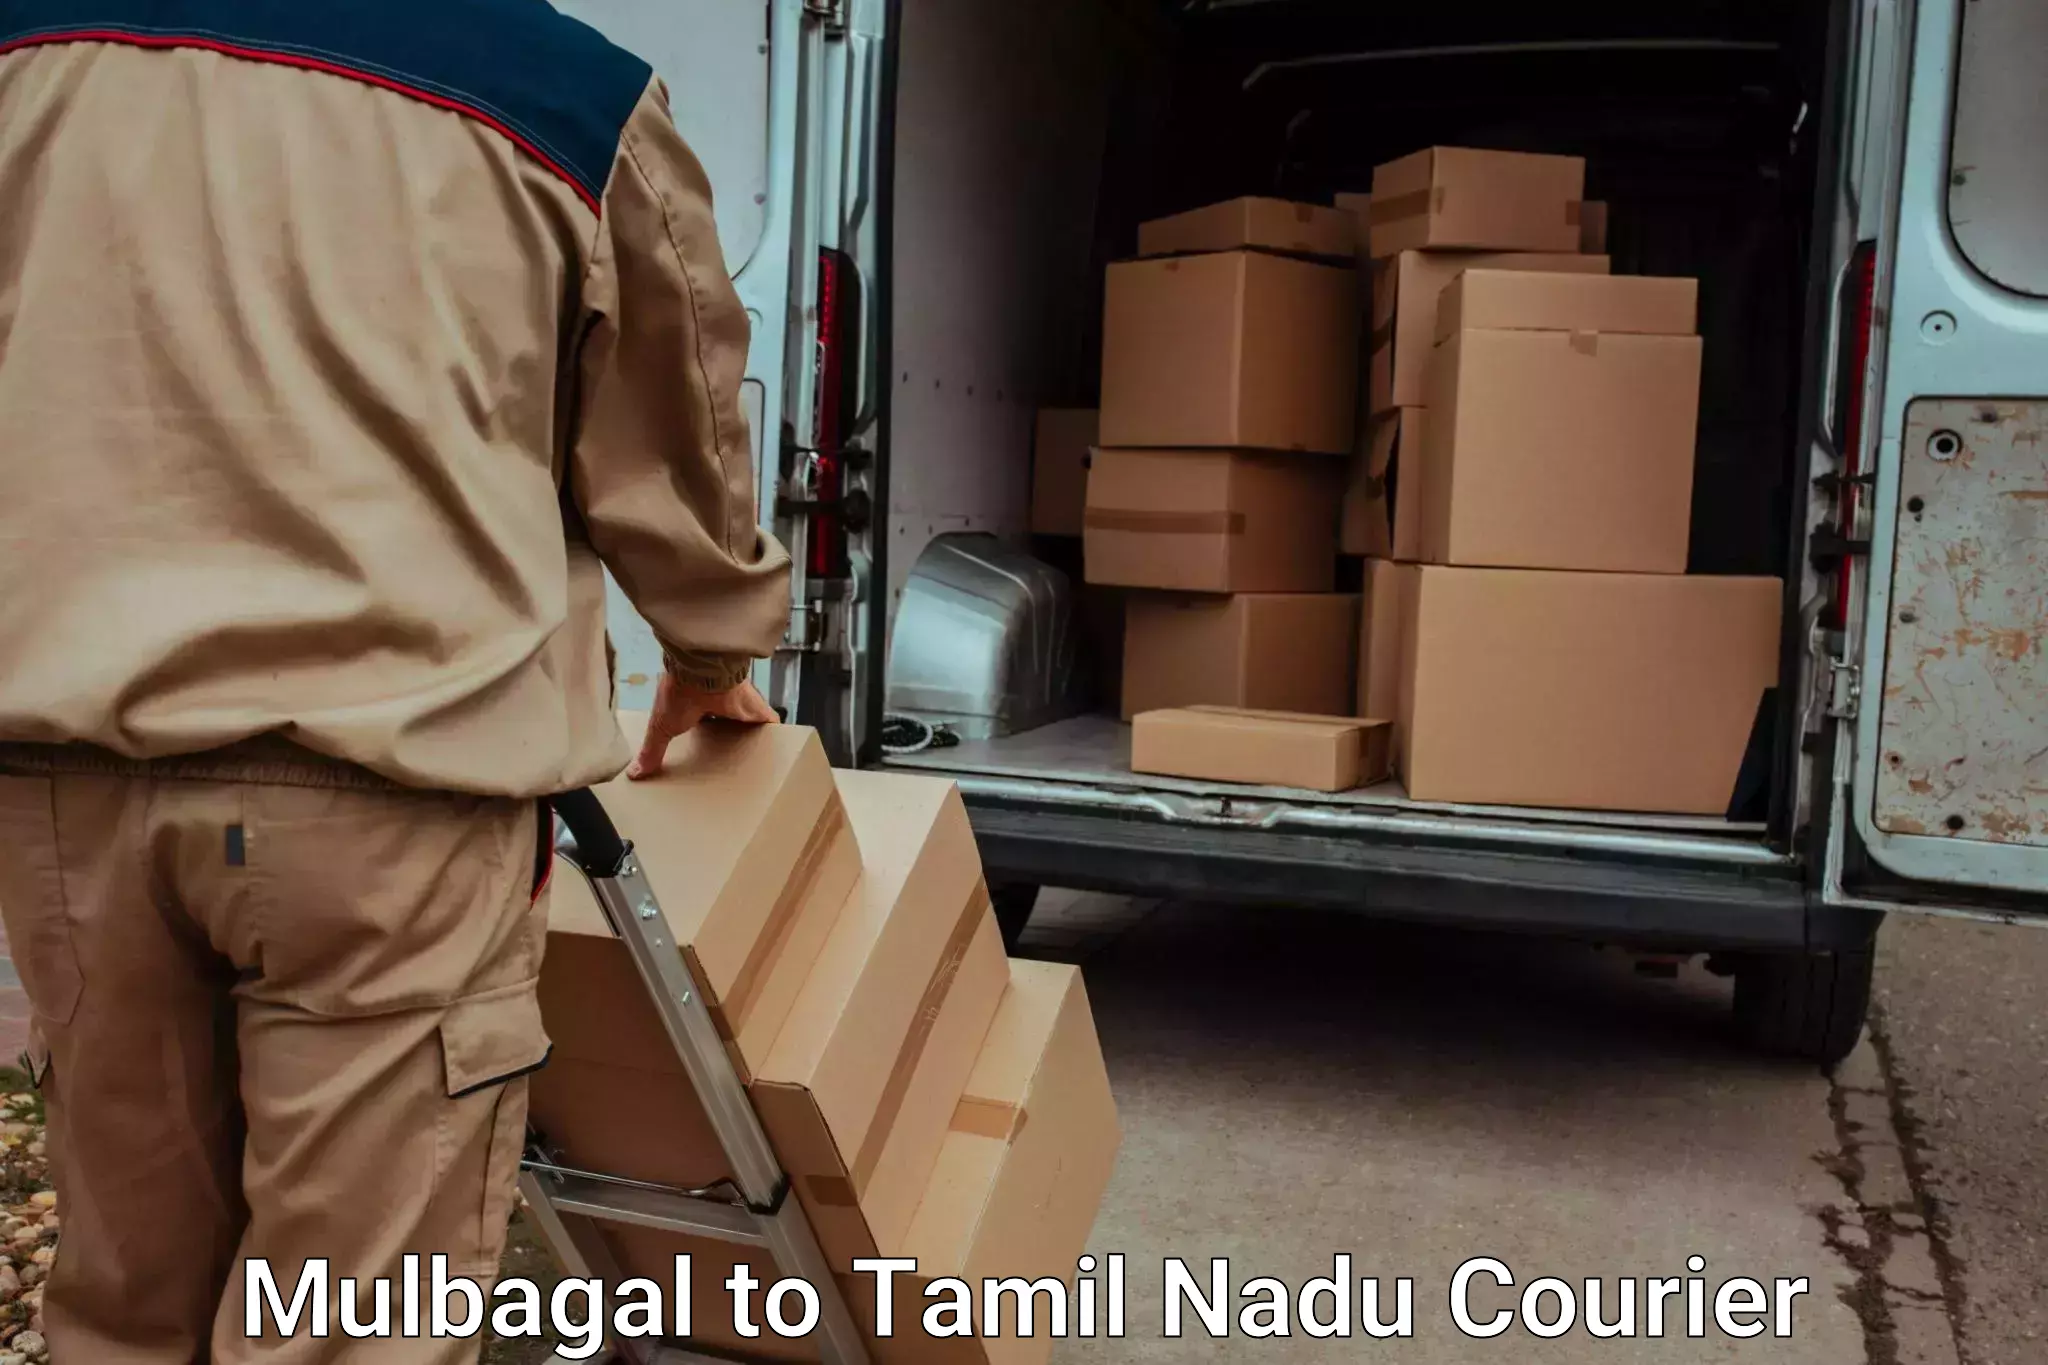 Personal effects shipping Mulbagal to Vandavasi